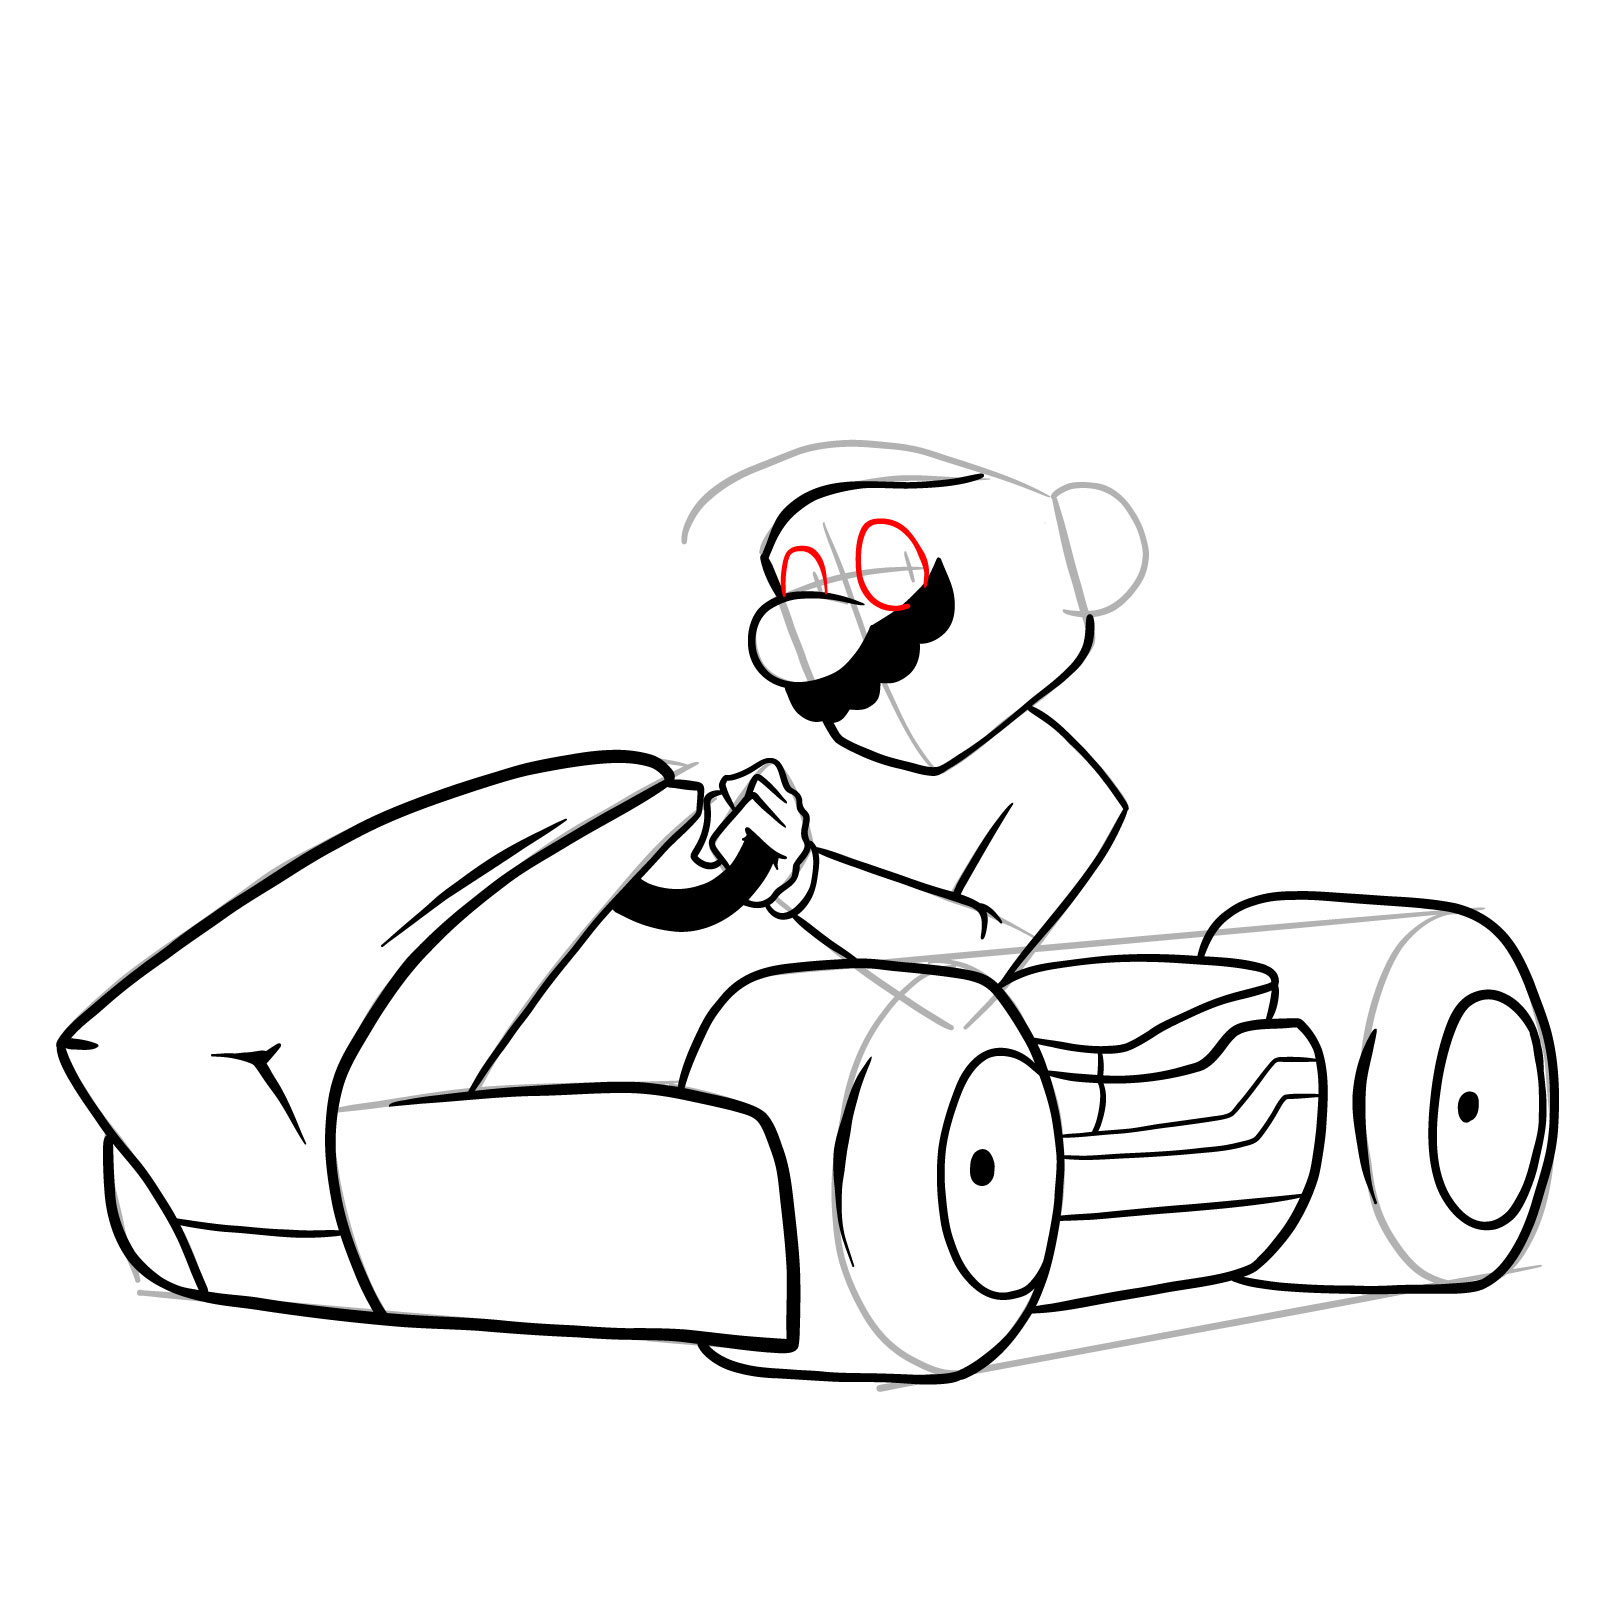 How to draw Race Traitors Mario - step 24